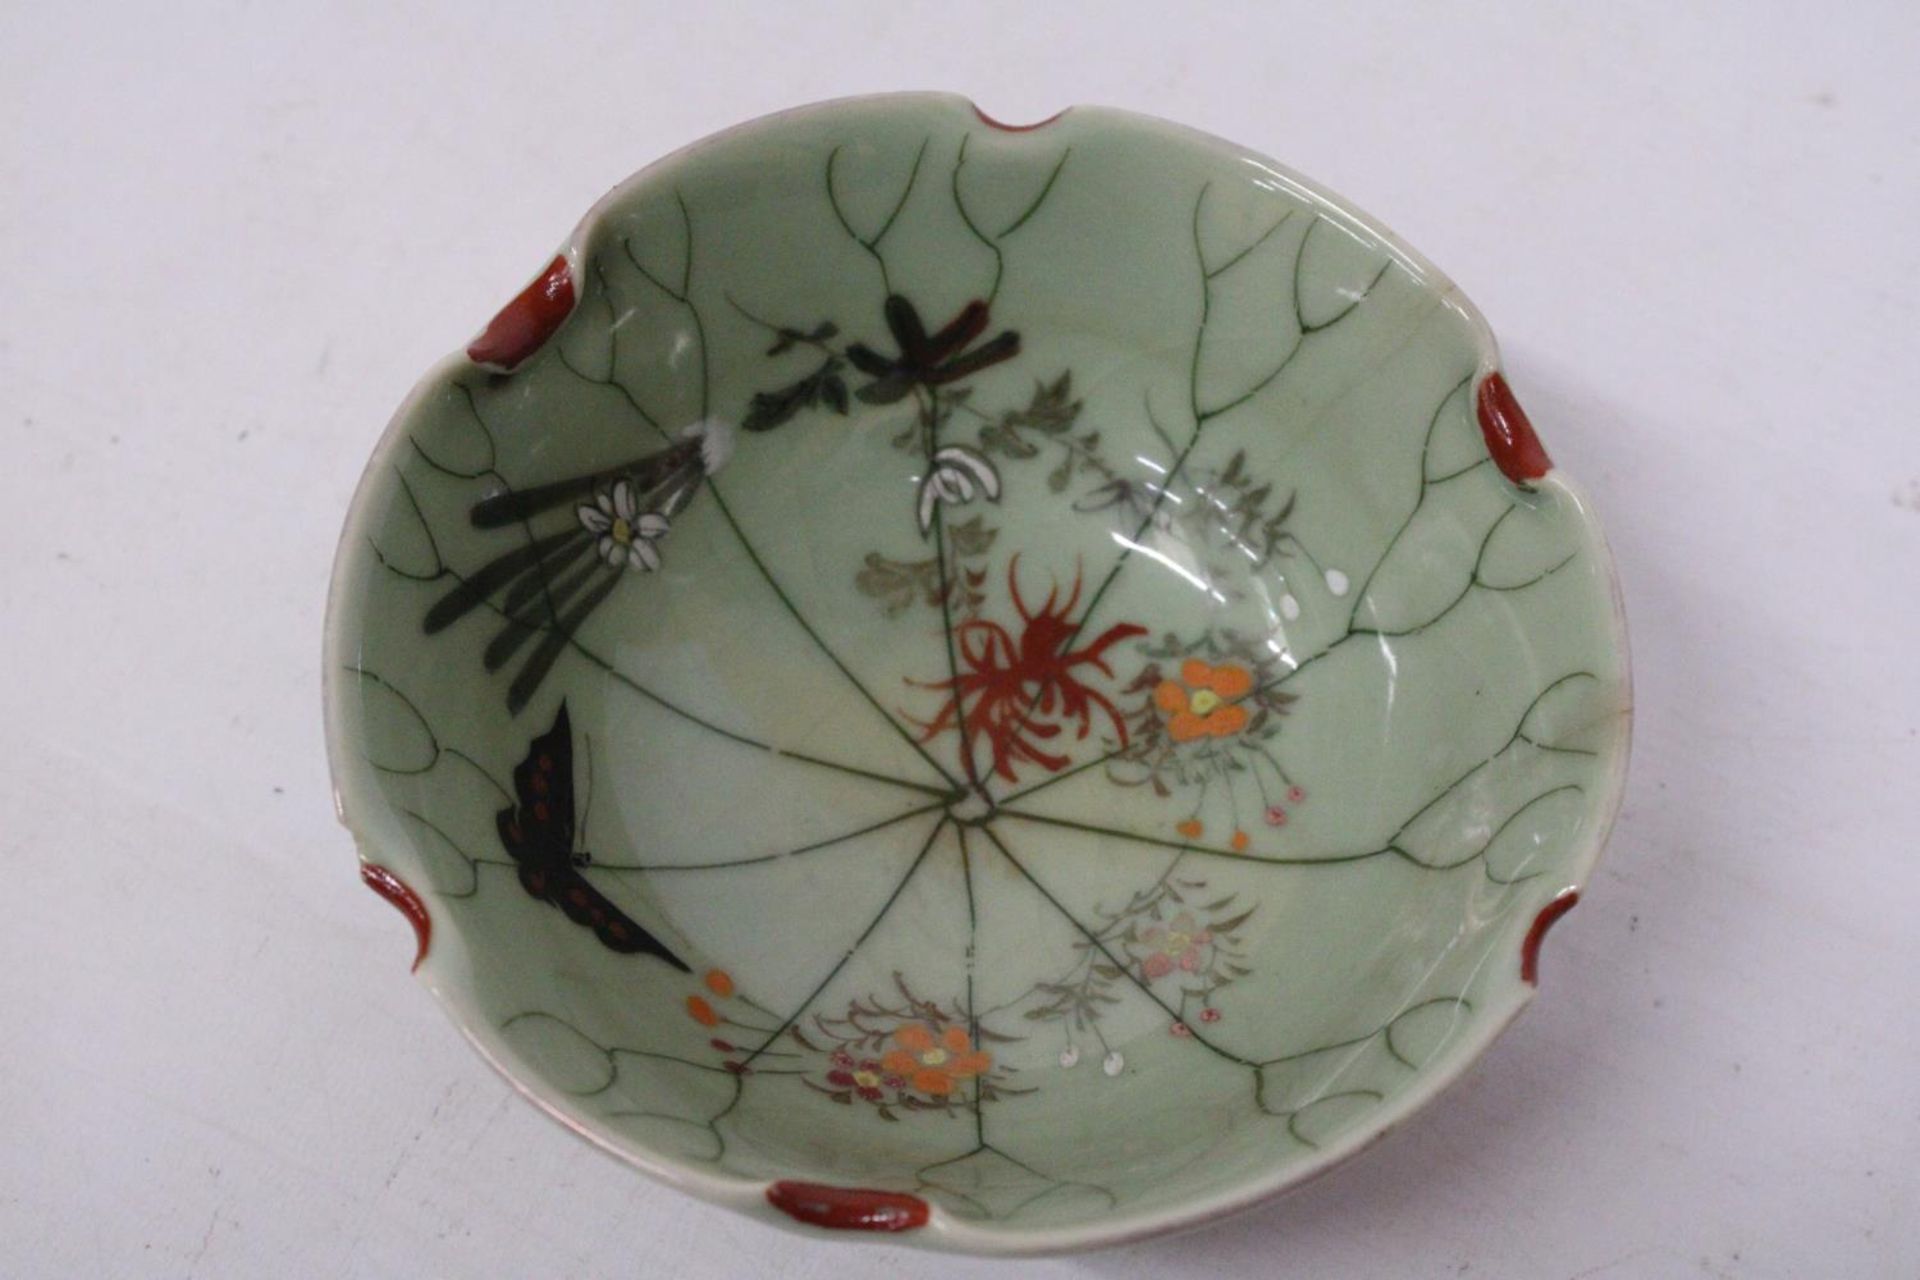 A CHINESE PORCELAIN GLAZED FOOTED BOWL WITH FLORAL DECORATION - Image 7 of 7